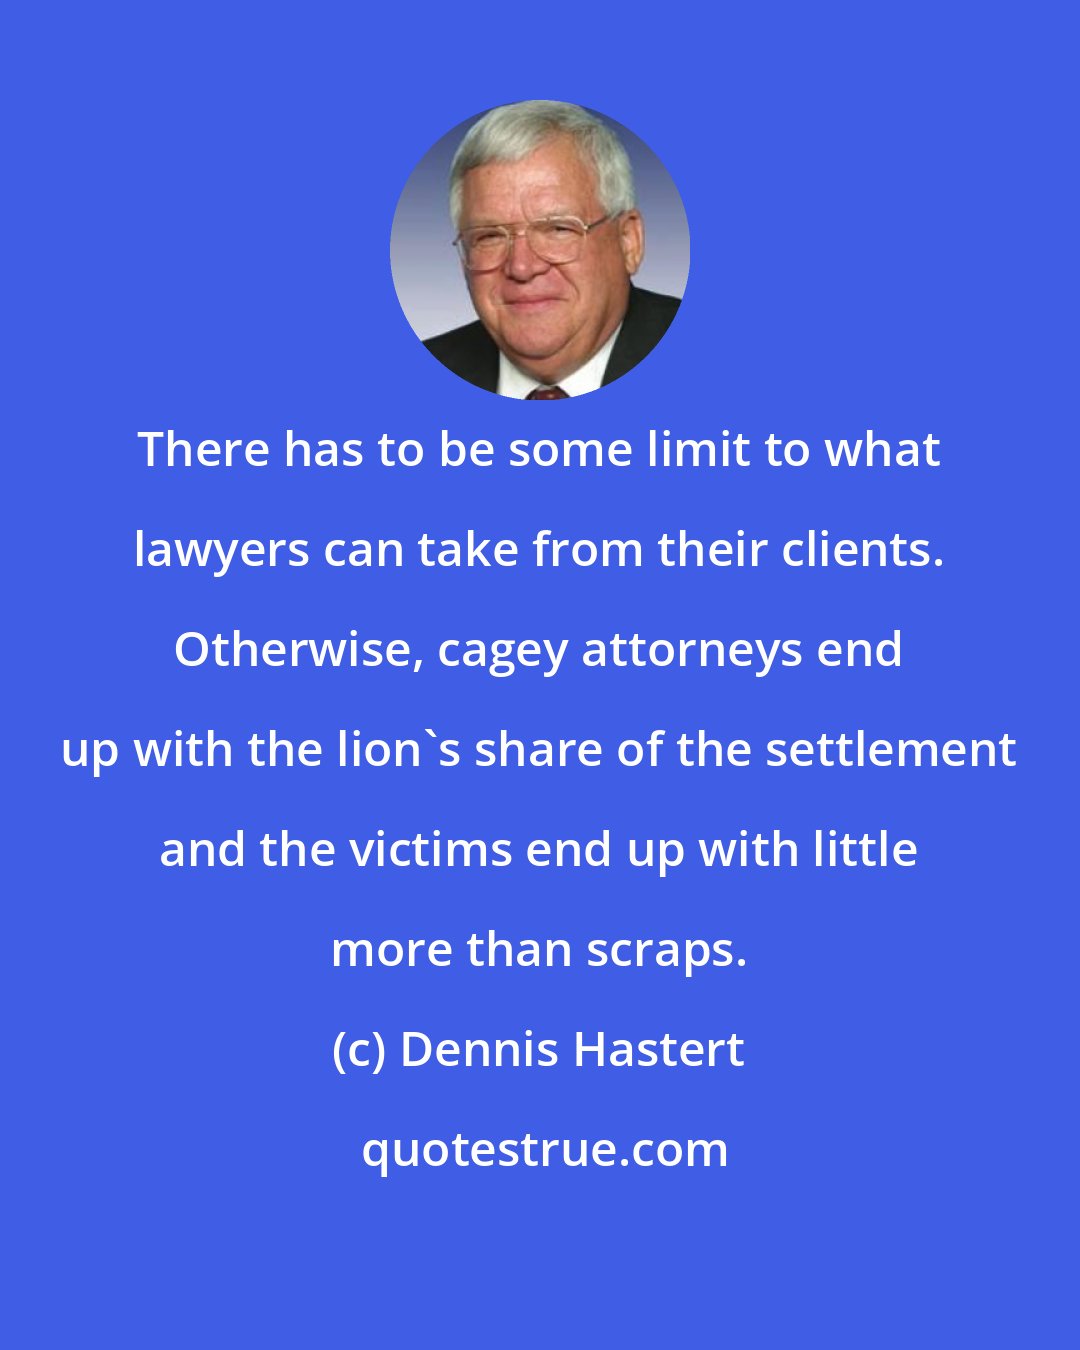 Dennis Hastert: There has to be some limit to what lawyers can take from their clients. Otherwise, cagey attorneys end up with the lion's share of the settlement and the victims end up with little more than scraps.